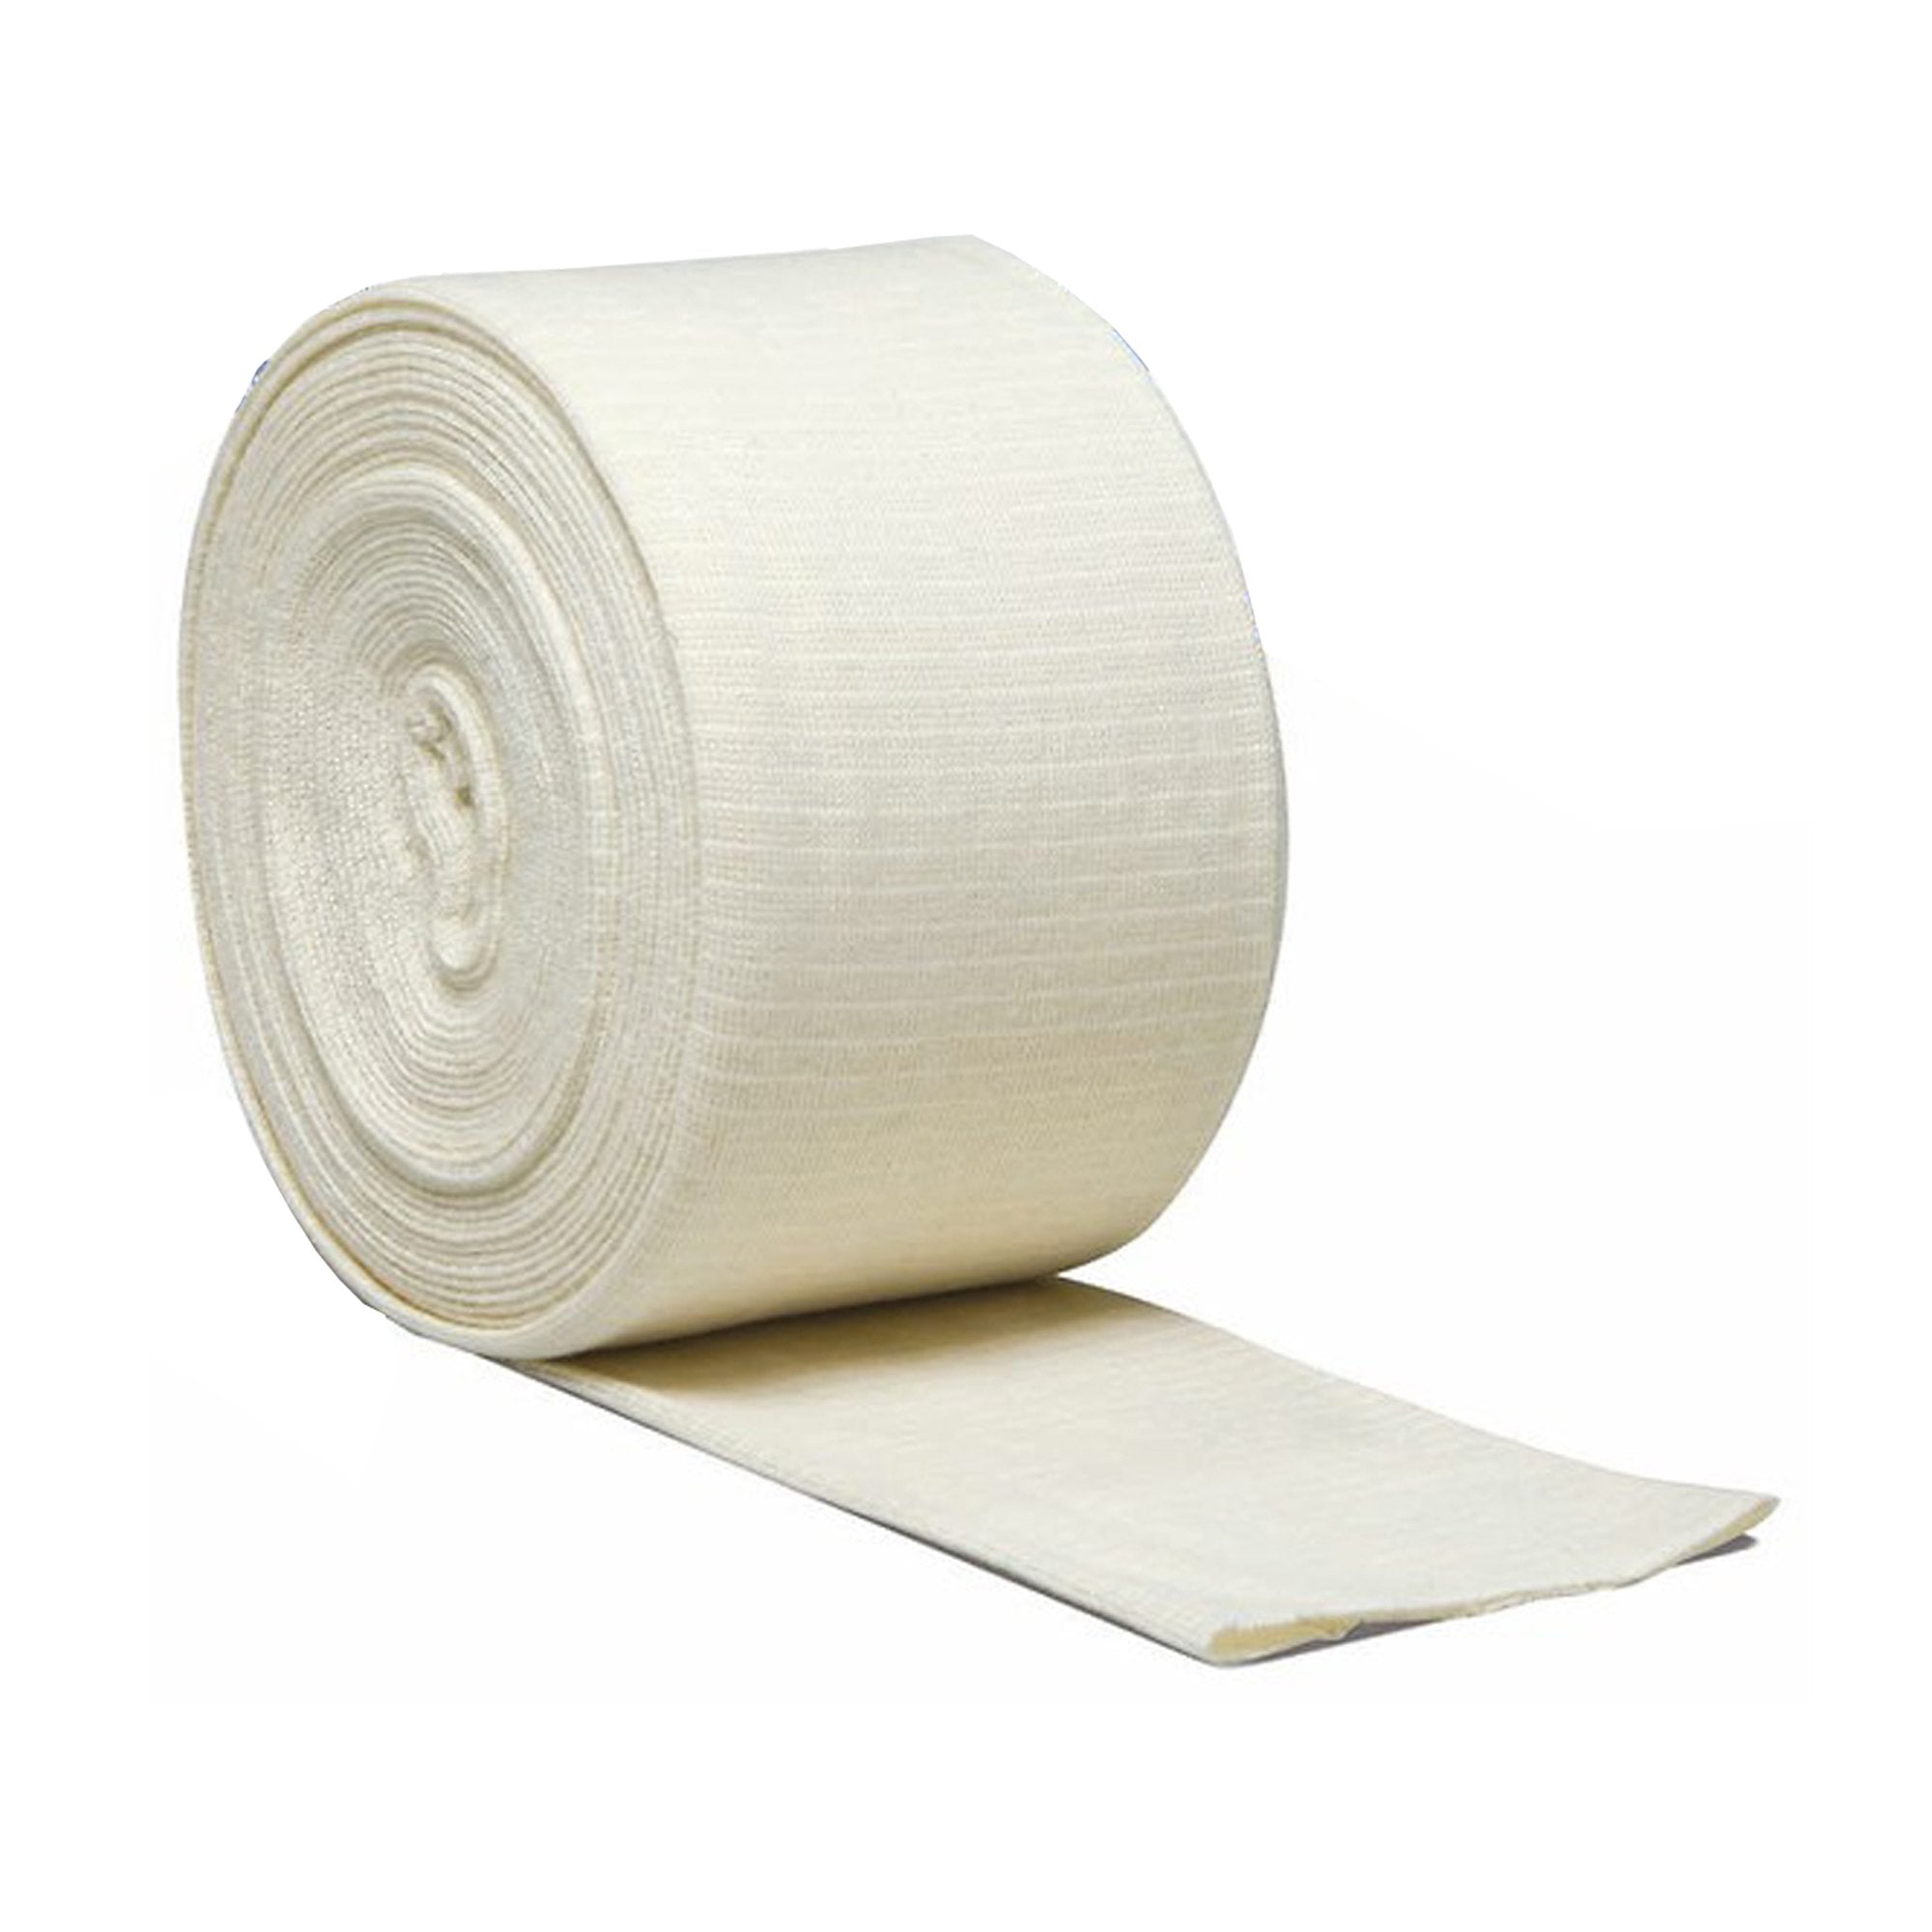 Elastic Tubular Support Bandage Comperm® LF 3 Inch X 11 Yard Pull On Natural NonSterile Size D Standard Compression